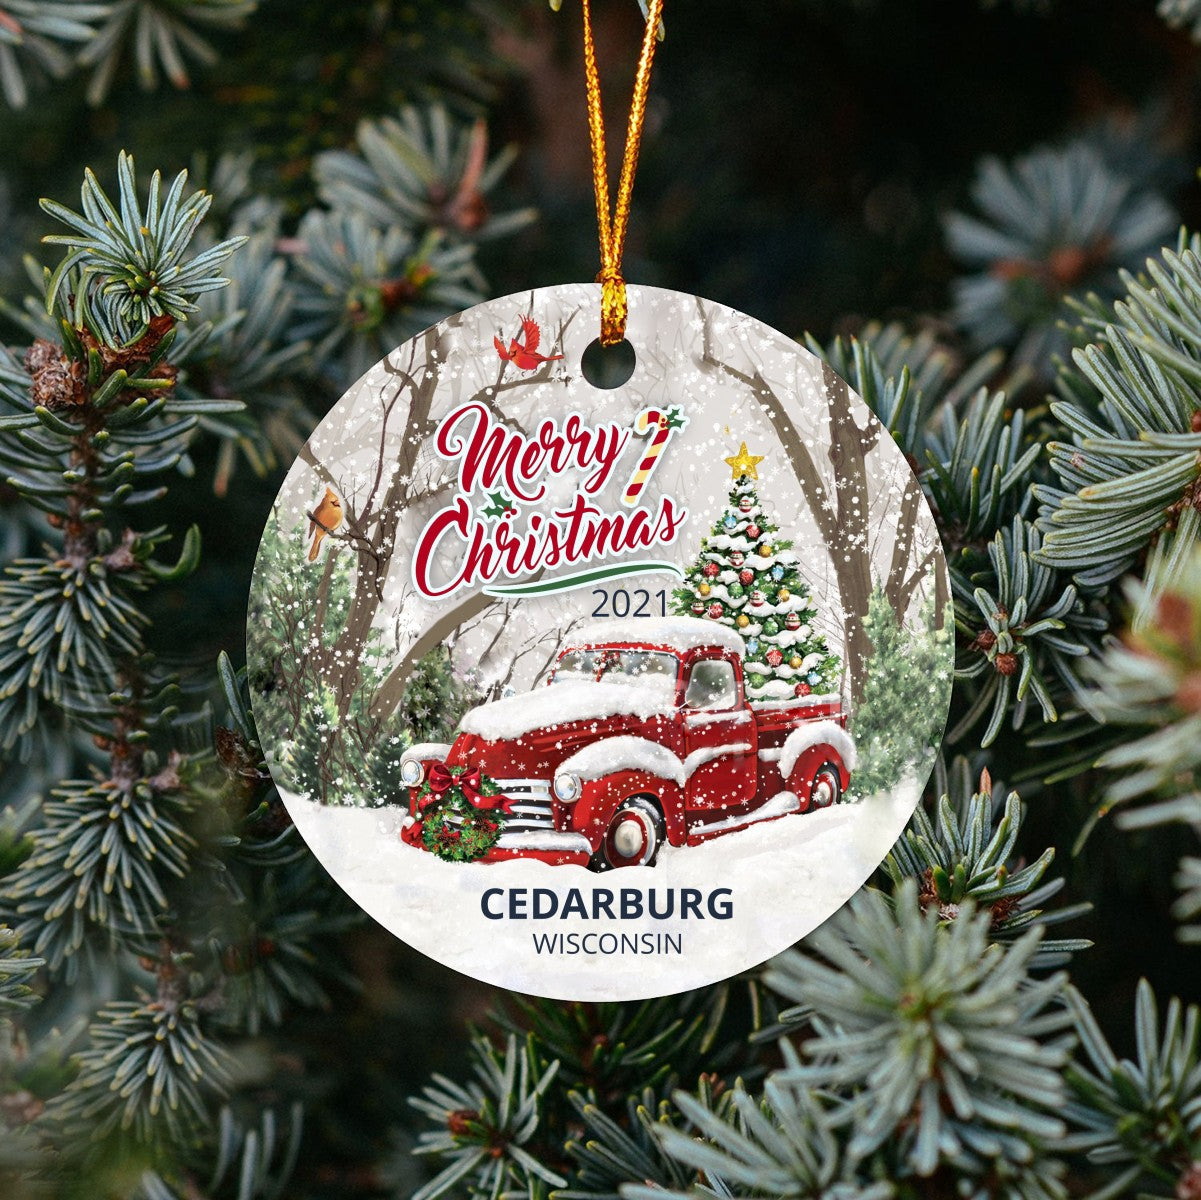 Christmas Tree Ornaments Cedarburg - Ornament Customize With Name City And State Cedarburg Wisconsin WI - Red Truck Xmas Ornaments 3'' Plastic Gift For Family, Friend And Housewarming